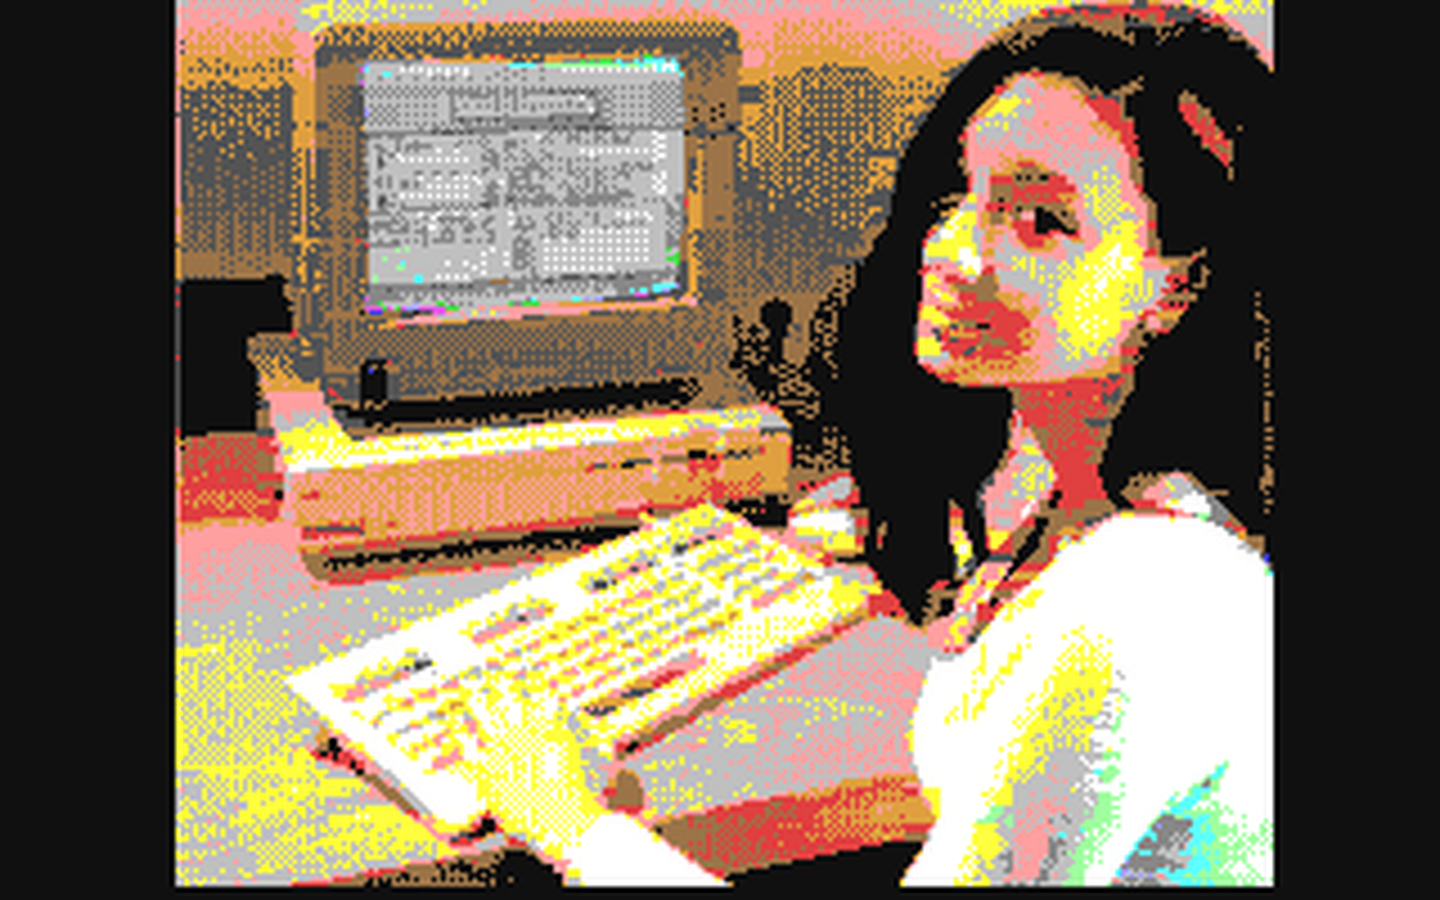 C64 GameBase D42_Adventure_System Out_of_Order_Softworks 2014